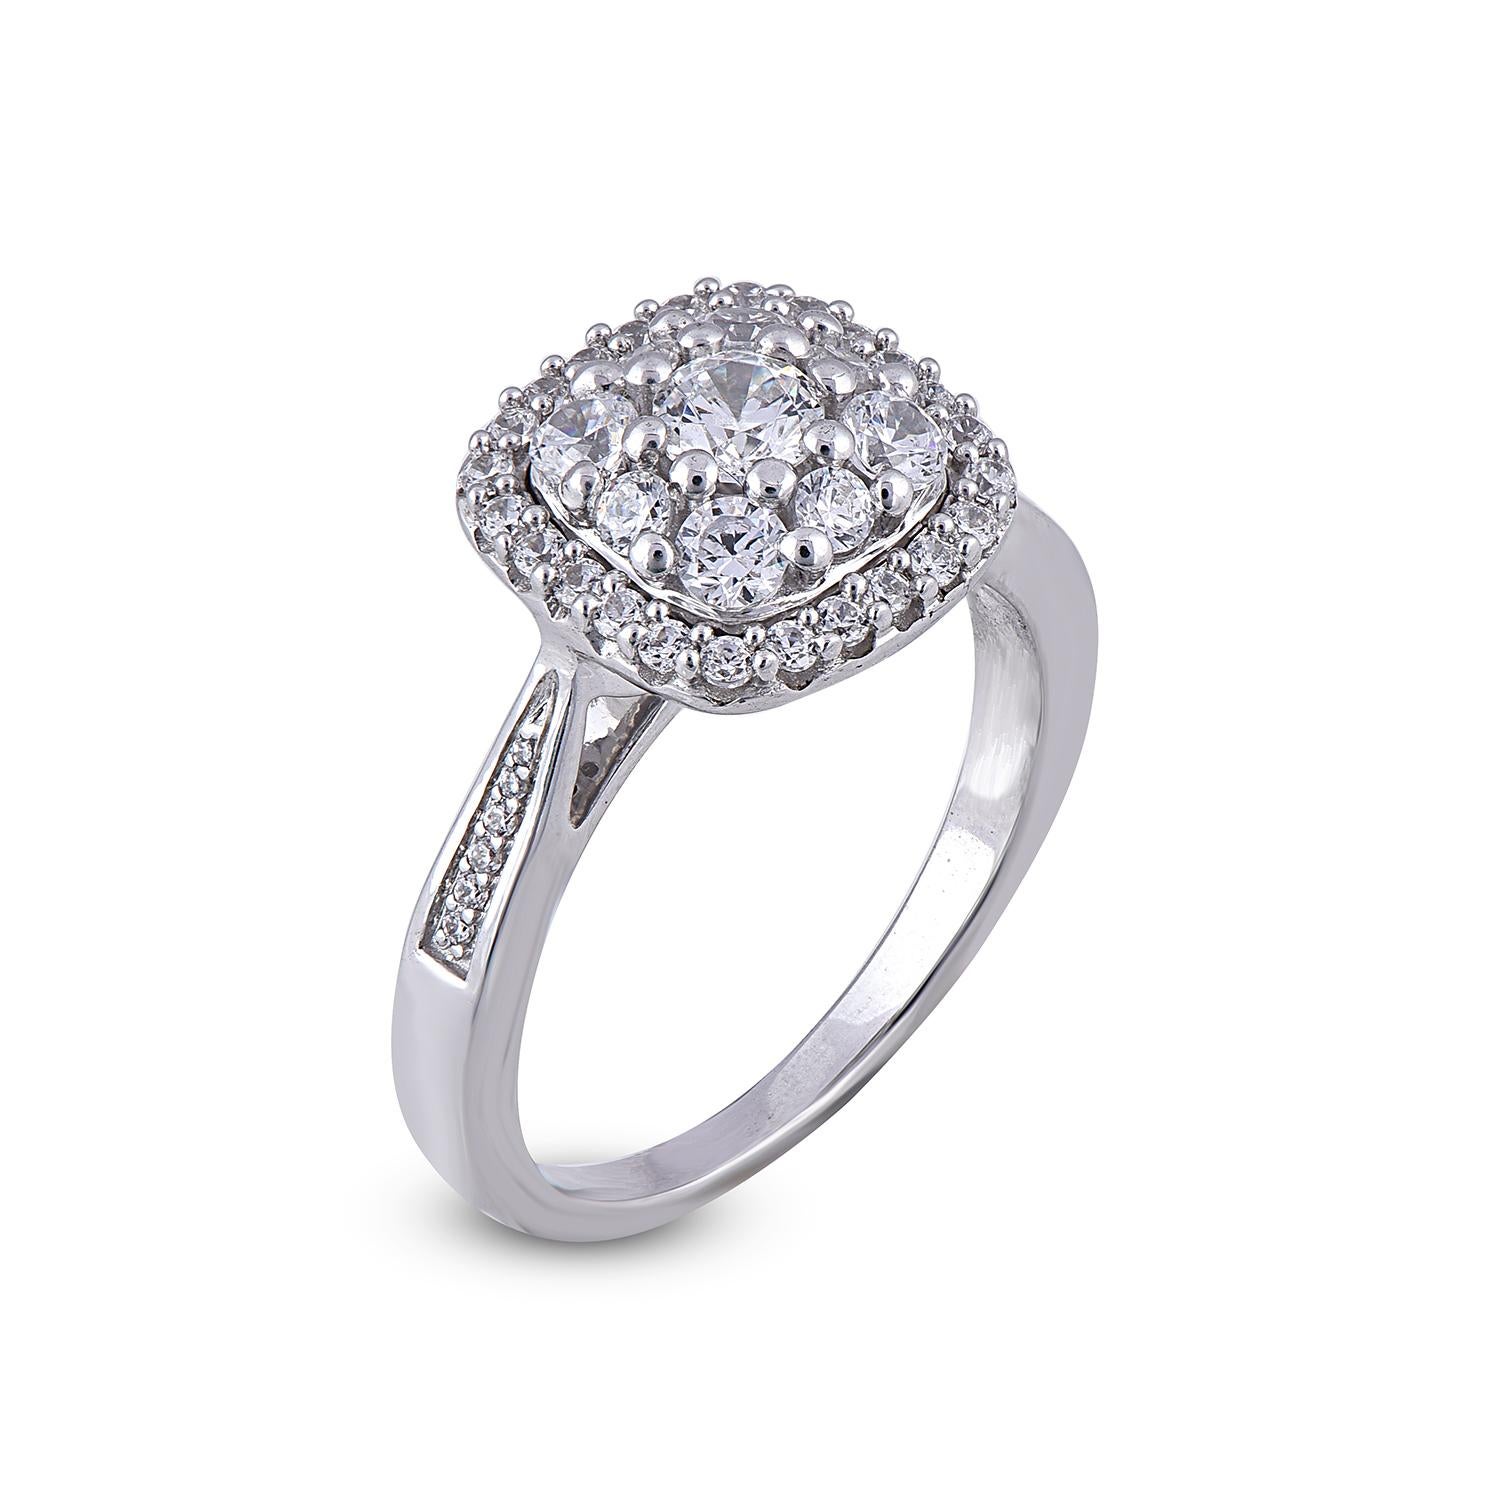 This cushion diamond wedding ring is sure to be admired for the inherent classic beauty and elegance within its design. The total weight of diamonds 1.00 carat, H-I color, I2 Clarity. This ring is beautifully crafted in 14 Karat White Gold and